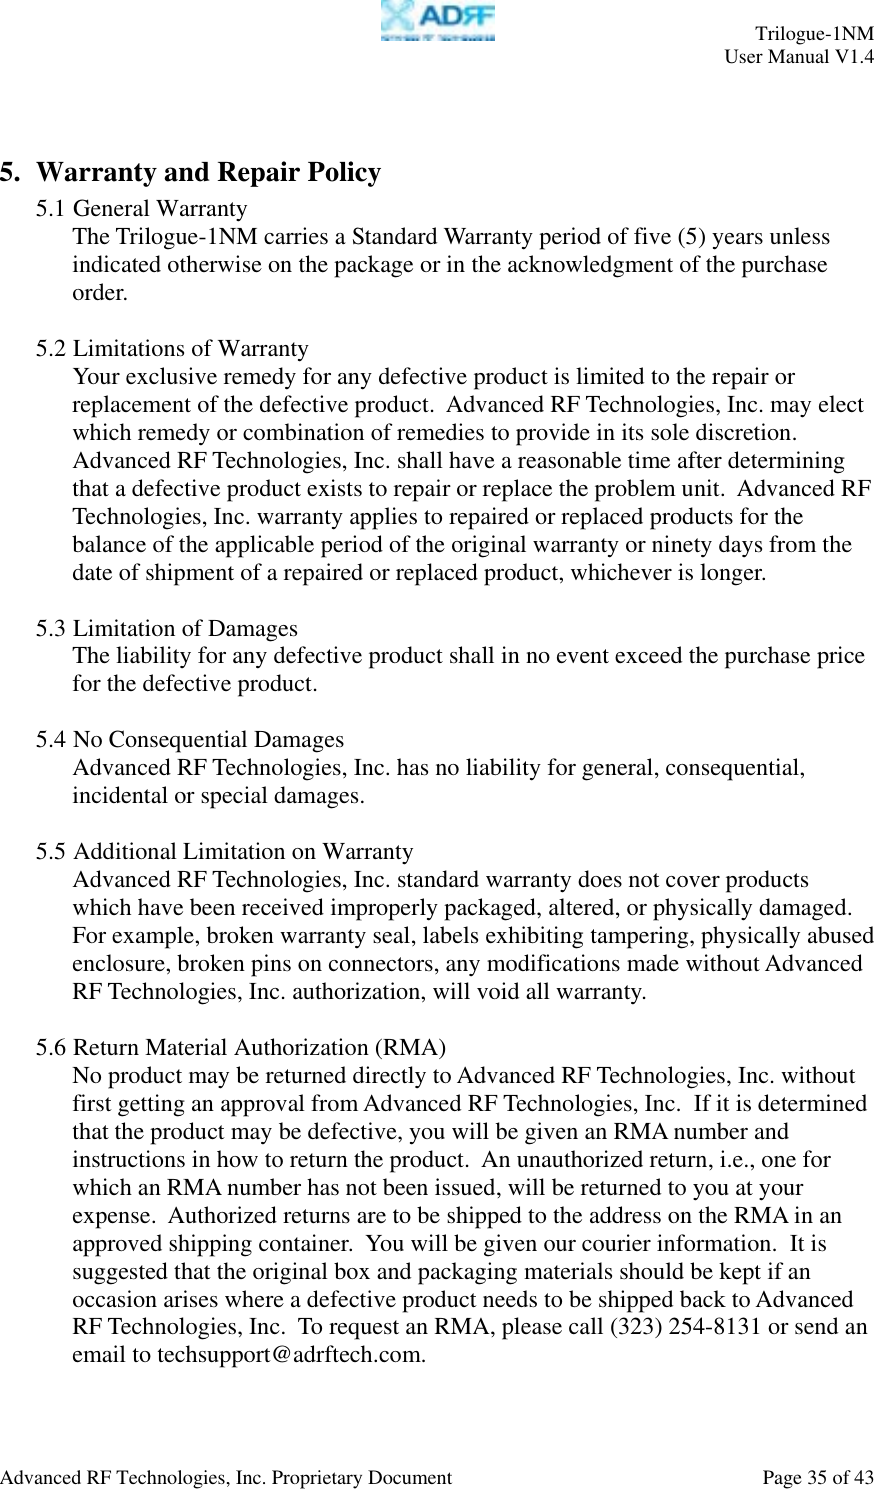     Trilogue-1NM User Manual V1.4  Advanced RF Technologies, Inc. Proprietary Document  Page 35 of 43   5. Warranty and Repair Policy 5.1 General Warranty The Trilogue-1NM carries a Standard Warranty period of five (5) years unless indicated otherwise on the package or in the acknowledgment of the purchase order.  5.2 Limitations of Warranty Your exclusive remedy for any defective product is limited to the repair or replacement of the defective product.  Advanced RF Technologies, Inc. may elect which remedy or combination of remedies to provide in its sole discretion.  Advanced RF Technologies, Inc. shall have a reasonable time after determining that a defective product exists to repair or replace the problem unit.  Advanced RF Technologies, Inc. warranty applies to repaired or replaced products for the balance of the applicable period of the original warranty or ninety days from the date of shipment of a repaired or replaced product, whichever is longer.   5.3 Limitation of Damages The liability for any defective product shall in no event exceed the purchase price for the defective product.    5.4 No Consequential Damages Advanced RF Technologies, Inc. has no liability for general, consequential, incidental or special damages.    5.5 Additional Limitation on Warranty Advanced RF Technologies, Inc. standard warranty does not cover products which have been received improperly packaged, altered, or physically damaged.  For example, broken warranty seal, labels exhibiting tampering, physically abused enclosure, broken pins on connectors, any modifications made without Advanced RF Technologies, Inc. authorization, will void all warranty.    5.6 Return Material Authorization (RMA) No product may be returned directly to Advanced RF Technologies, Inc. without first getting an approval from Advanced RF Technologies, Inc.  If it is determined that the product may be defective, you will be given an RMA number and instructions in how to return the product.  An unauthorized return, i.e., one for which an RMA number has not been issued, will be returned to you at your expense.  Authorized returns are to be shipped to the address on the RMA in an approved shipping container.  You will be given our courier information.  It is suggested that the original box and packaging materials should be kept if an occasion arises where a defective product needs to be shipped back to Advanced RF Technologies, Inc.  To request an RMA, please call (323) 254-8131 or send an email to techsupport@adrftech.com. 